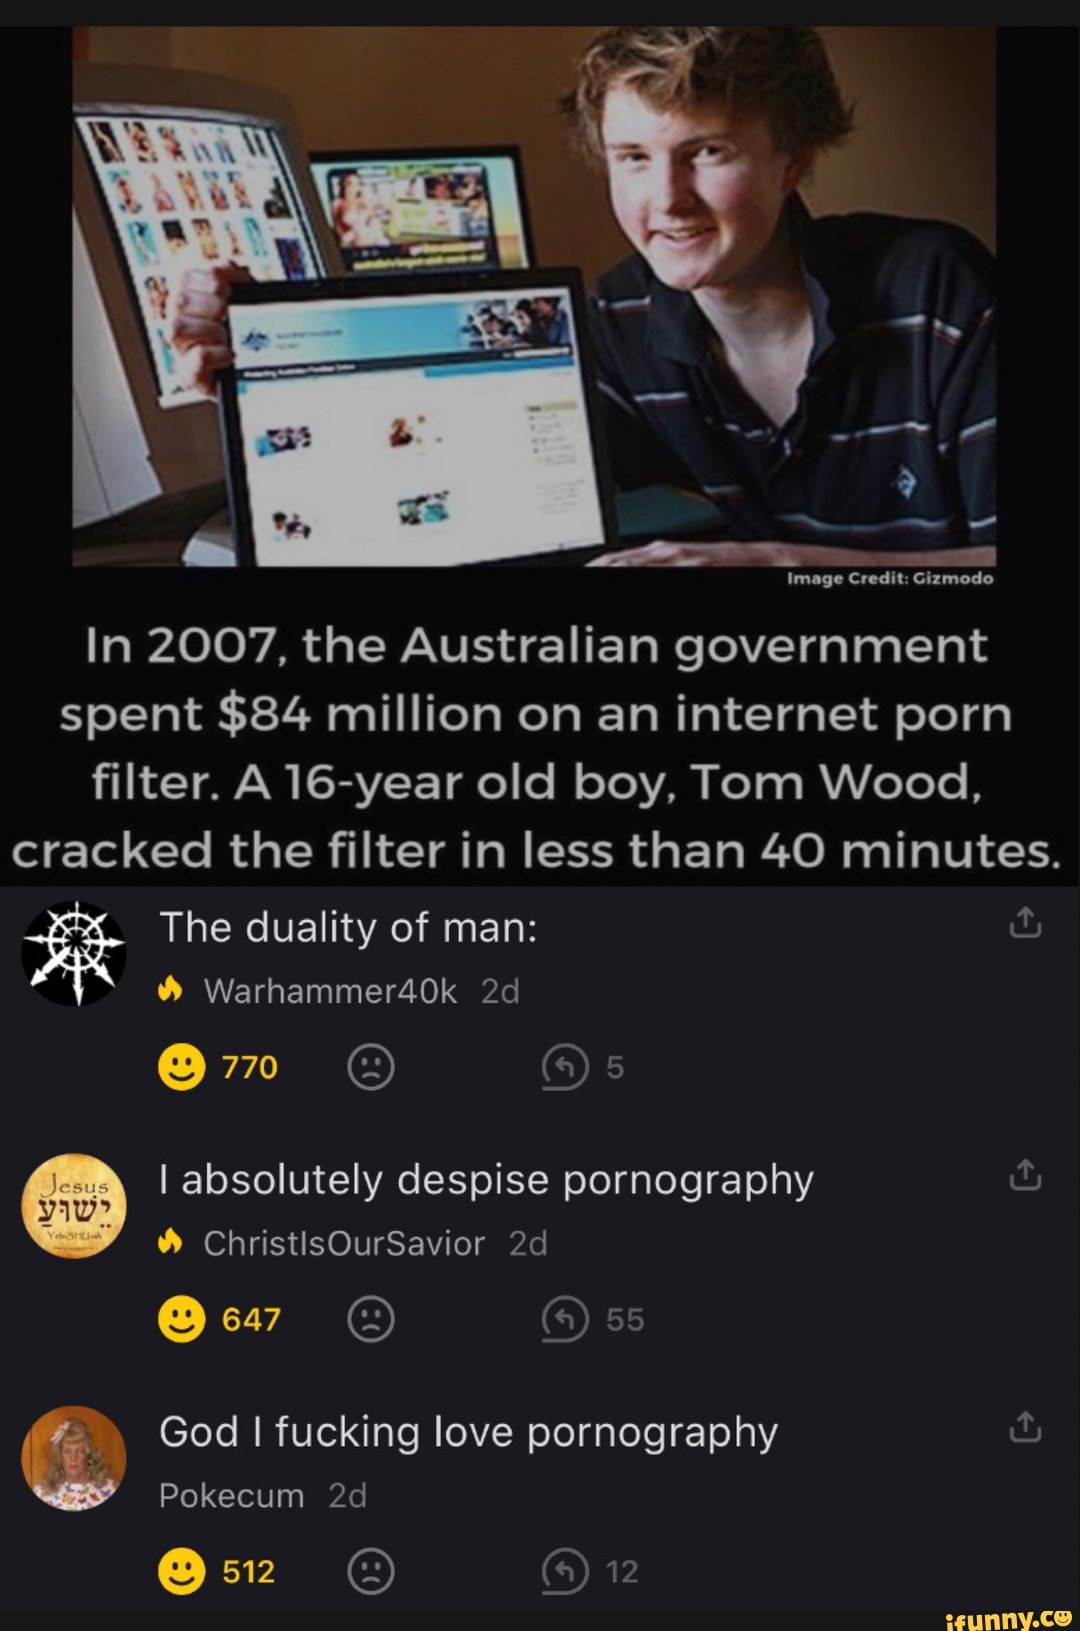 Image Credit: Gizmodo In the Australian government spent $84 million on an internet porn filter.